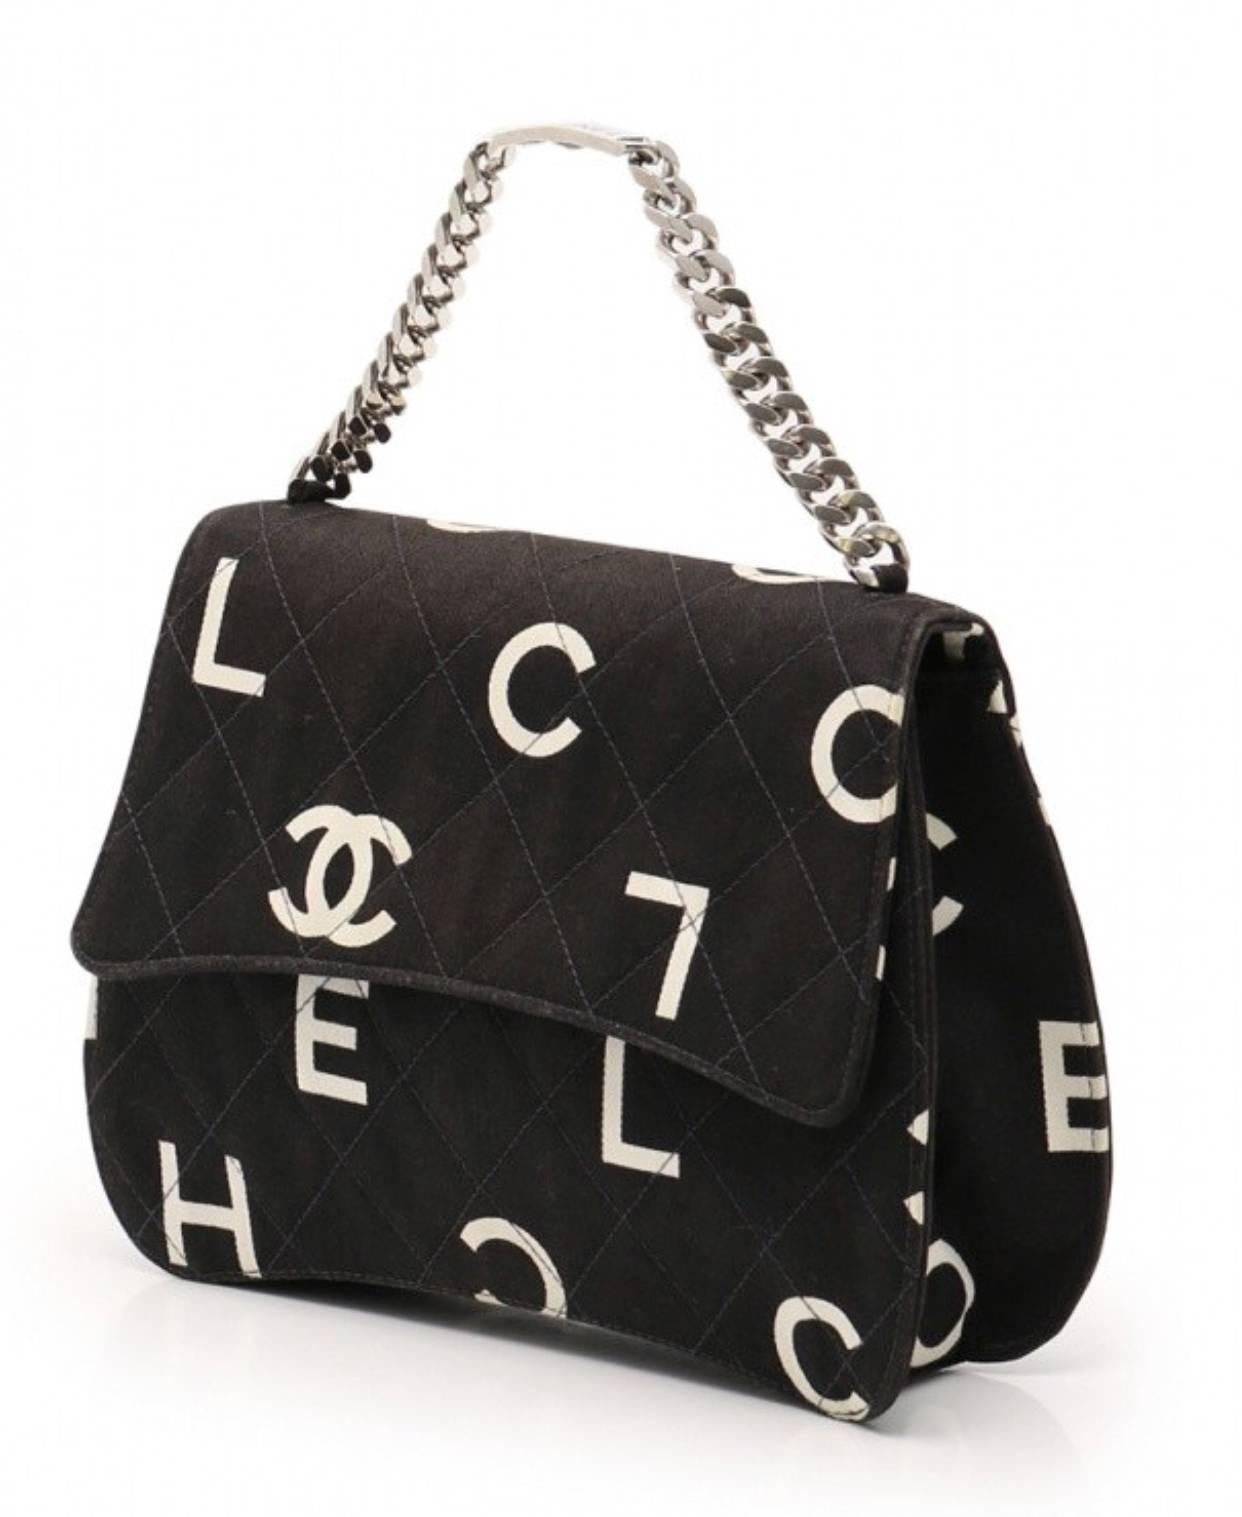 1990s. Vintage CHANEL black fabric canvas handbag with silver tone chain strap and white Chanel CC logo print all over. Very unique shape. Must have. 

Introducing one of the most chic and mod CHANEL purses back in the 90's!
Black canvas with white